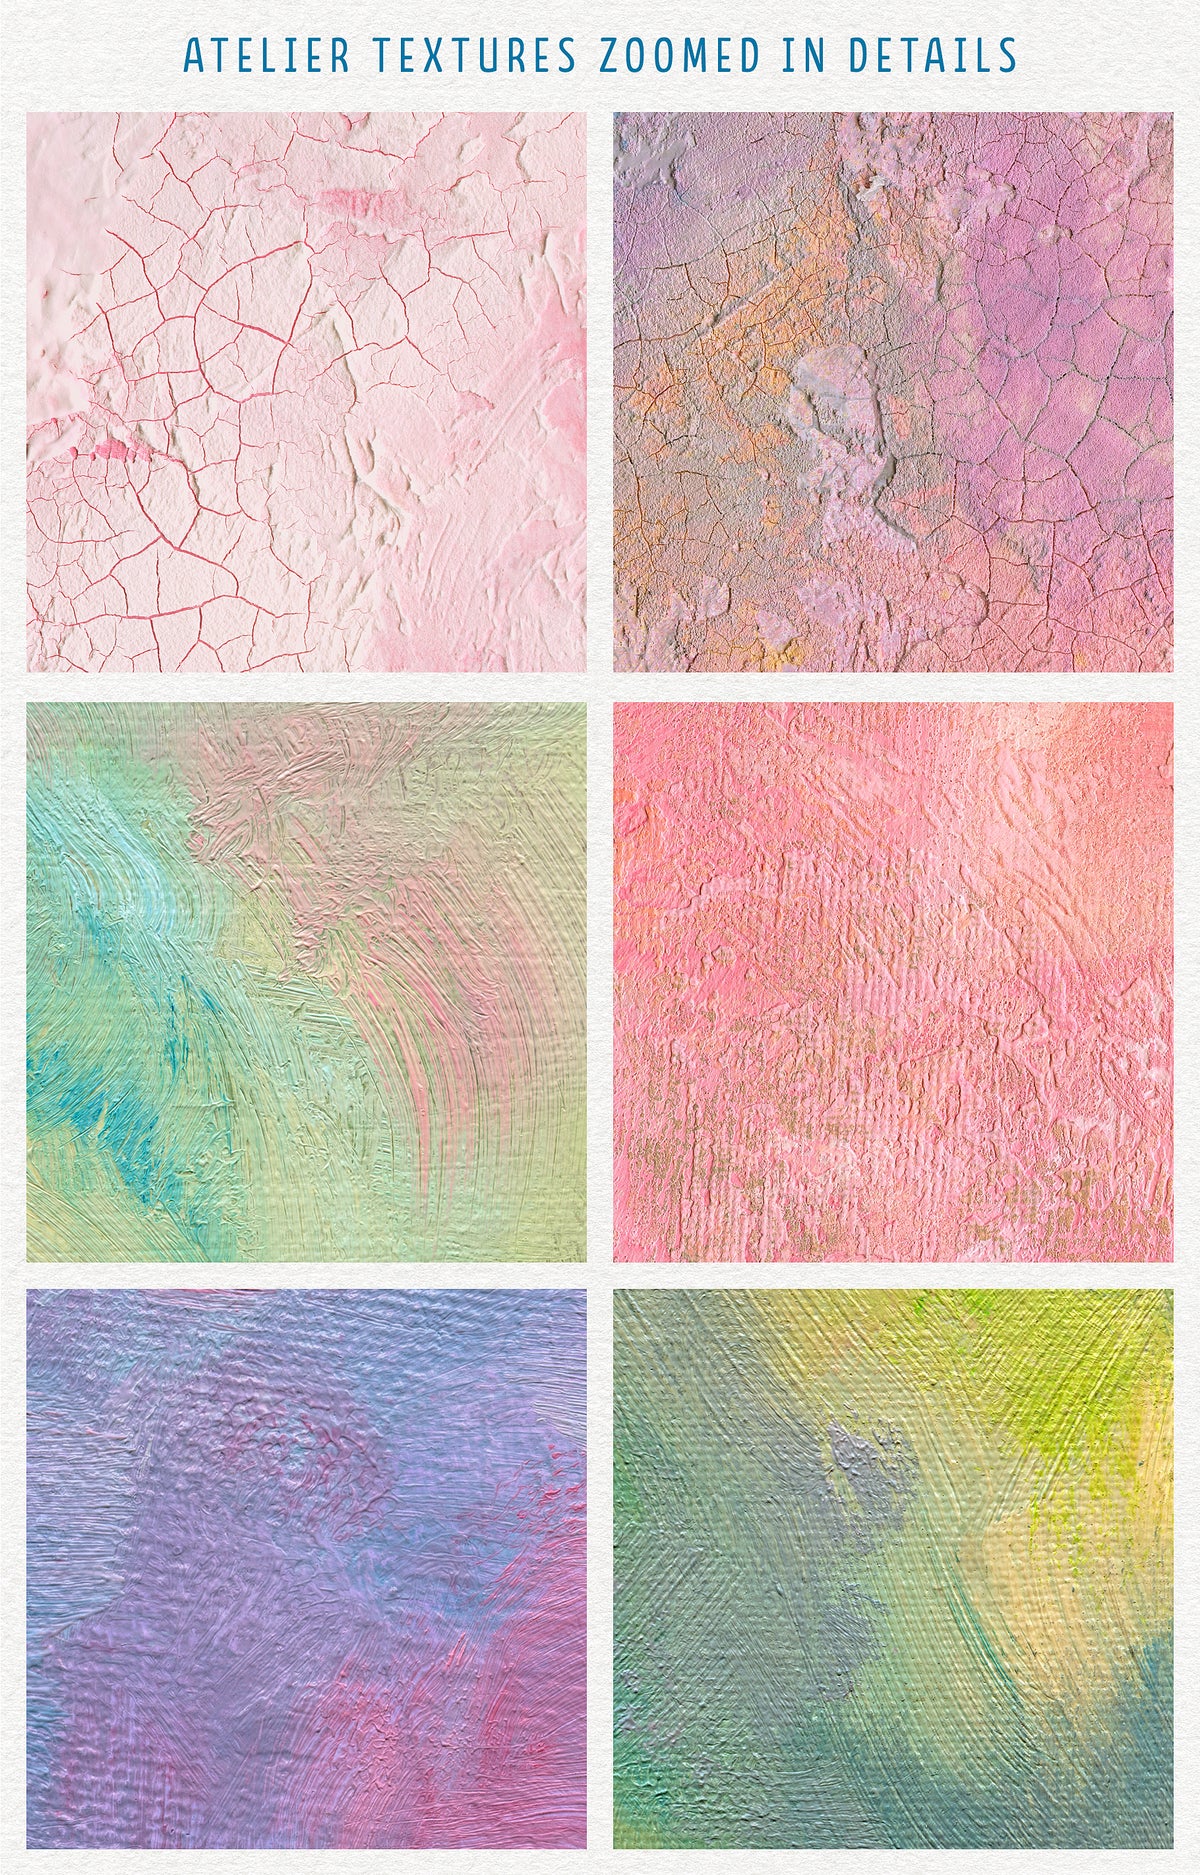 Zoomed in details of the Atelier hand-painted texture collection.